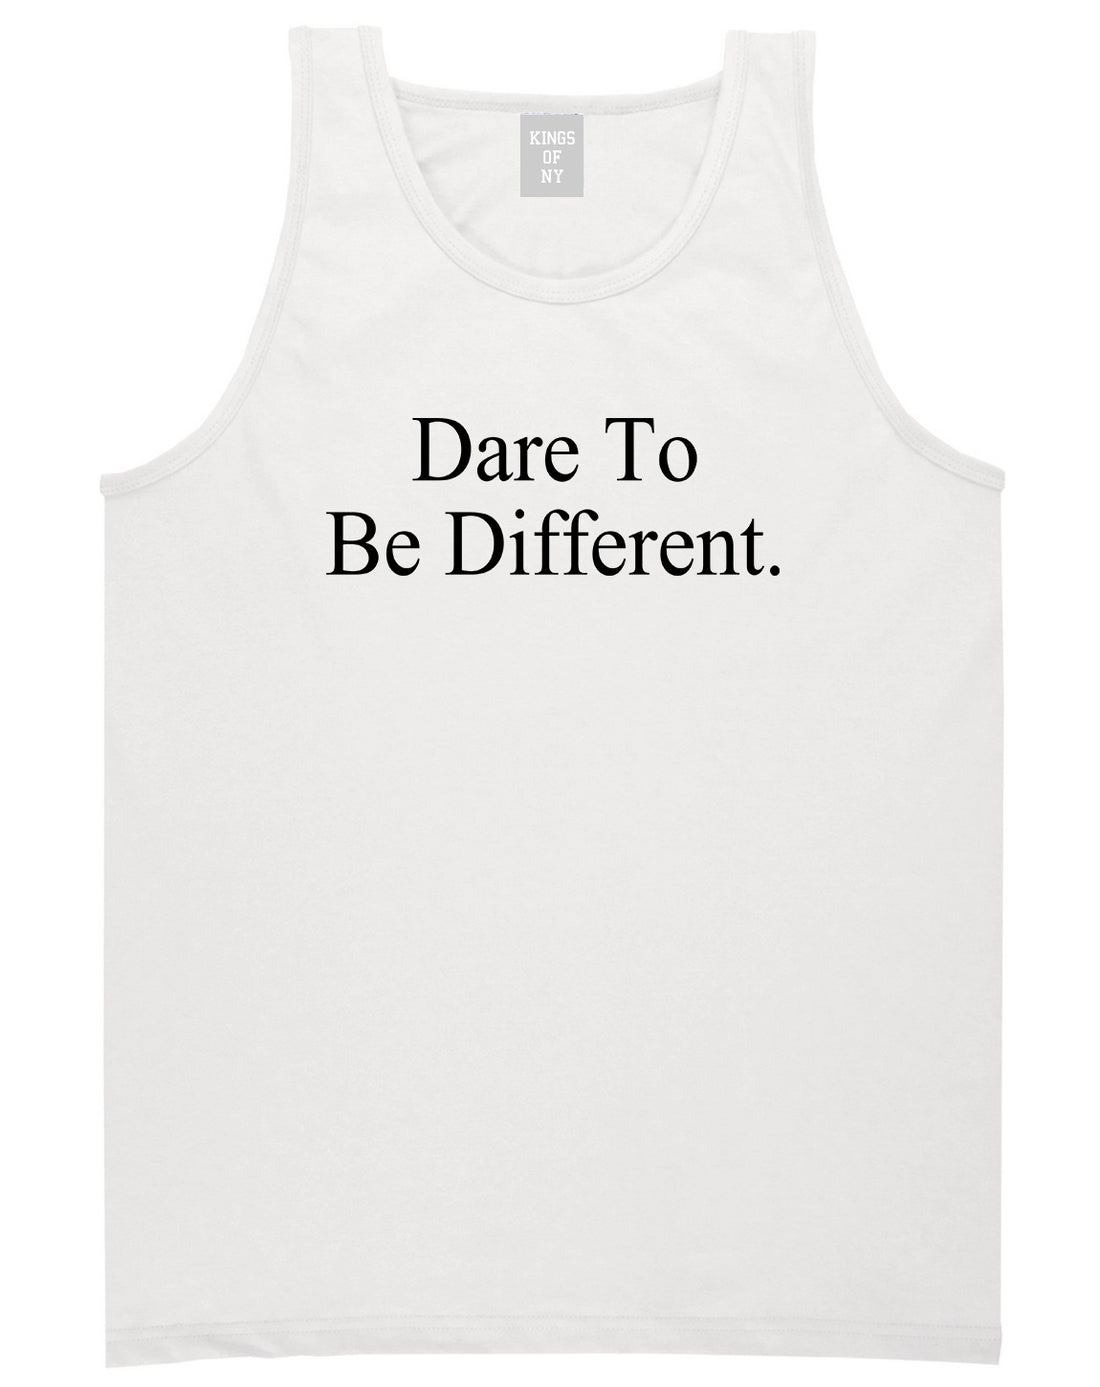 Dare_To_Be_Different Mens White Tank Top Shirt by Kings Of NY